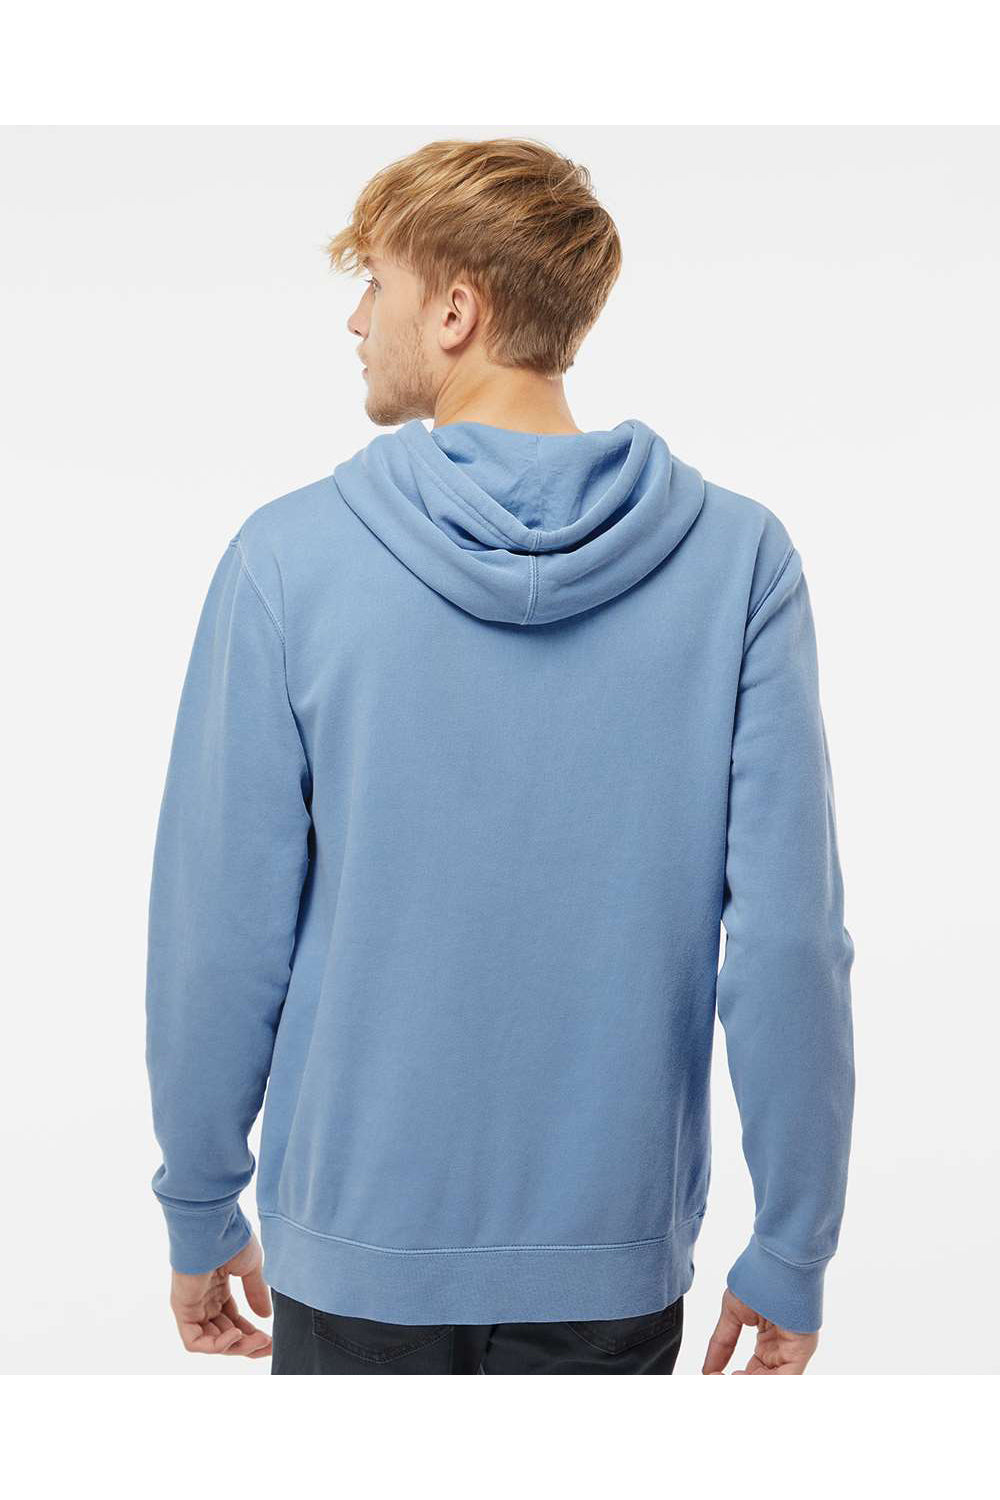 Independent Trading Co. PRM4500 Mens Pigment Dyed Hooded Sweatshirt Hoodie Light Blue Model Back